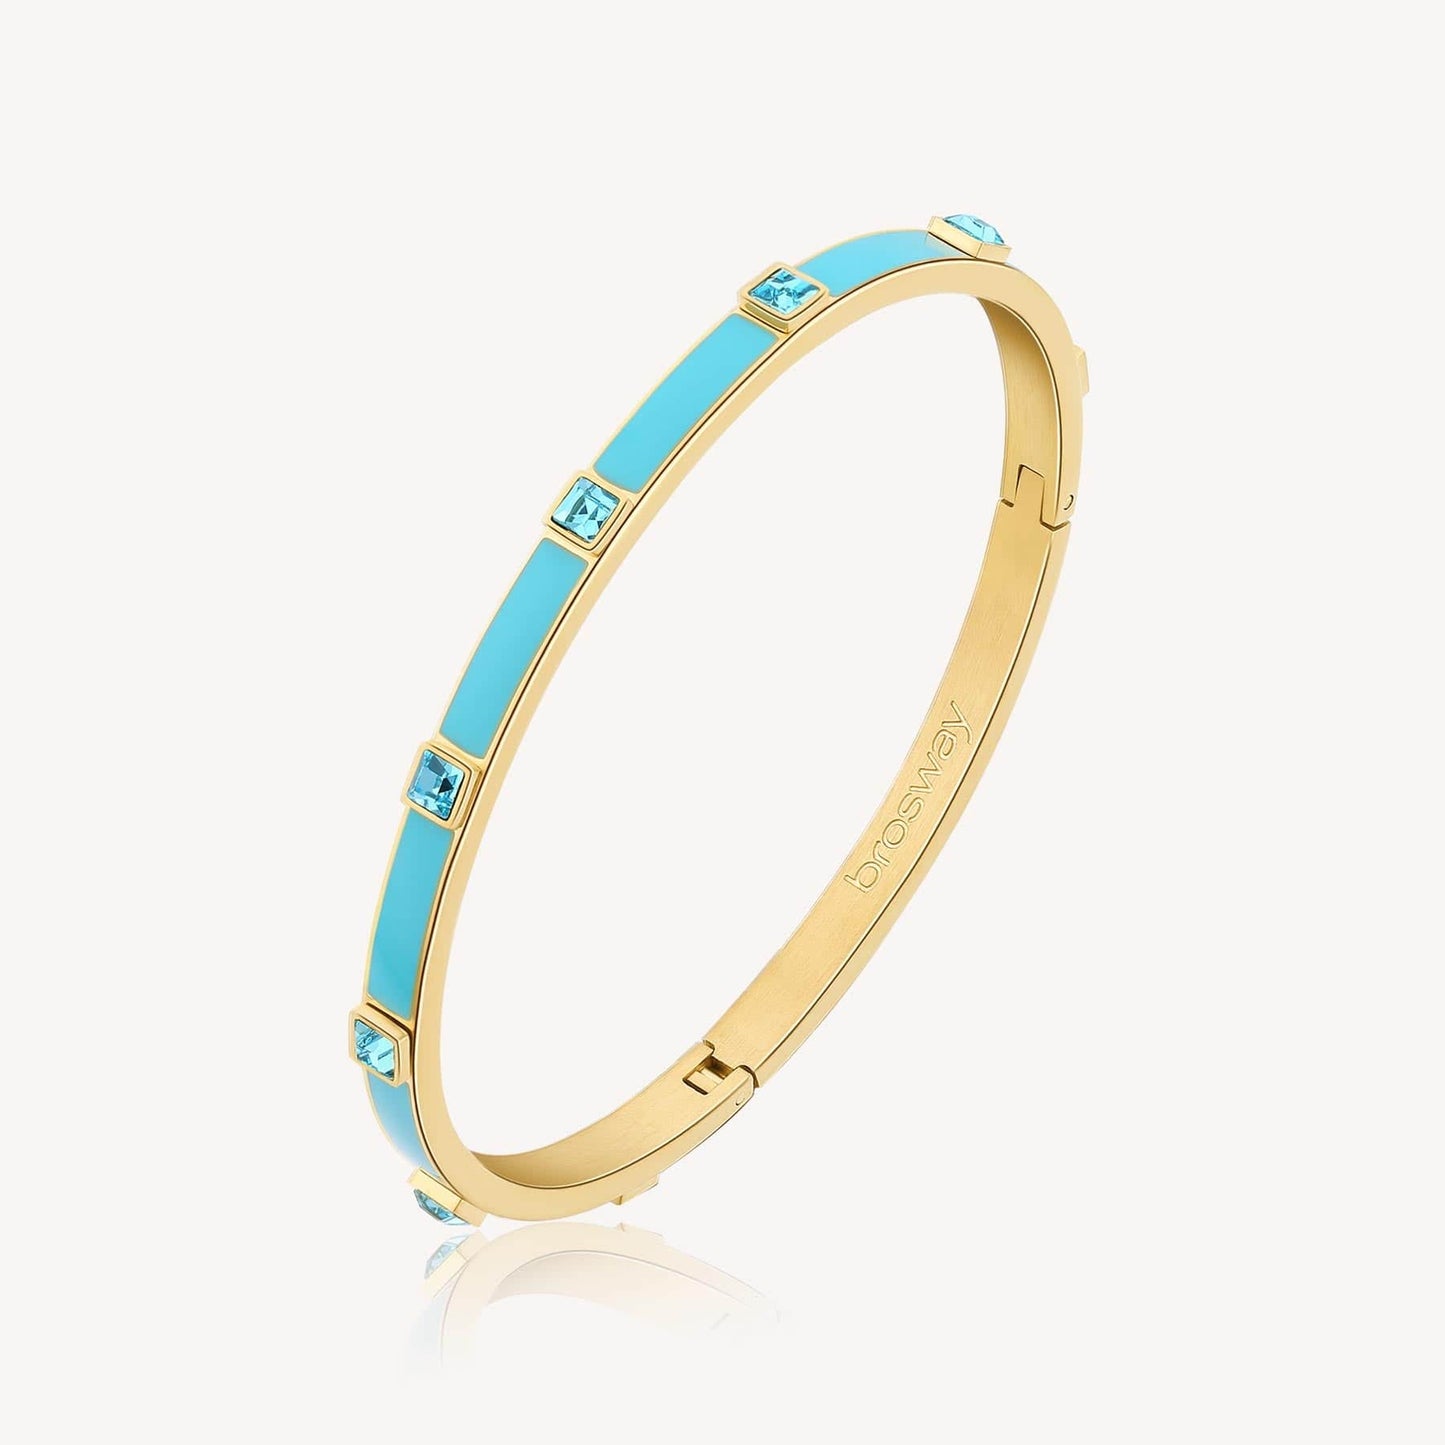 BRC-SS Stainless Steel Gold Tone Latching Bangle with Light Blue Enamel & Crystals